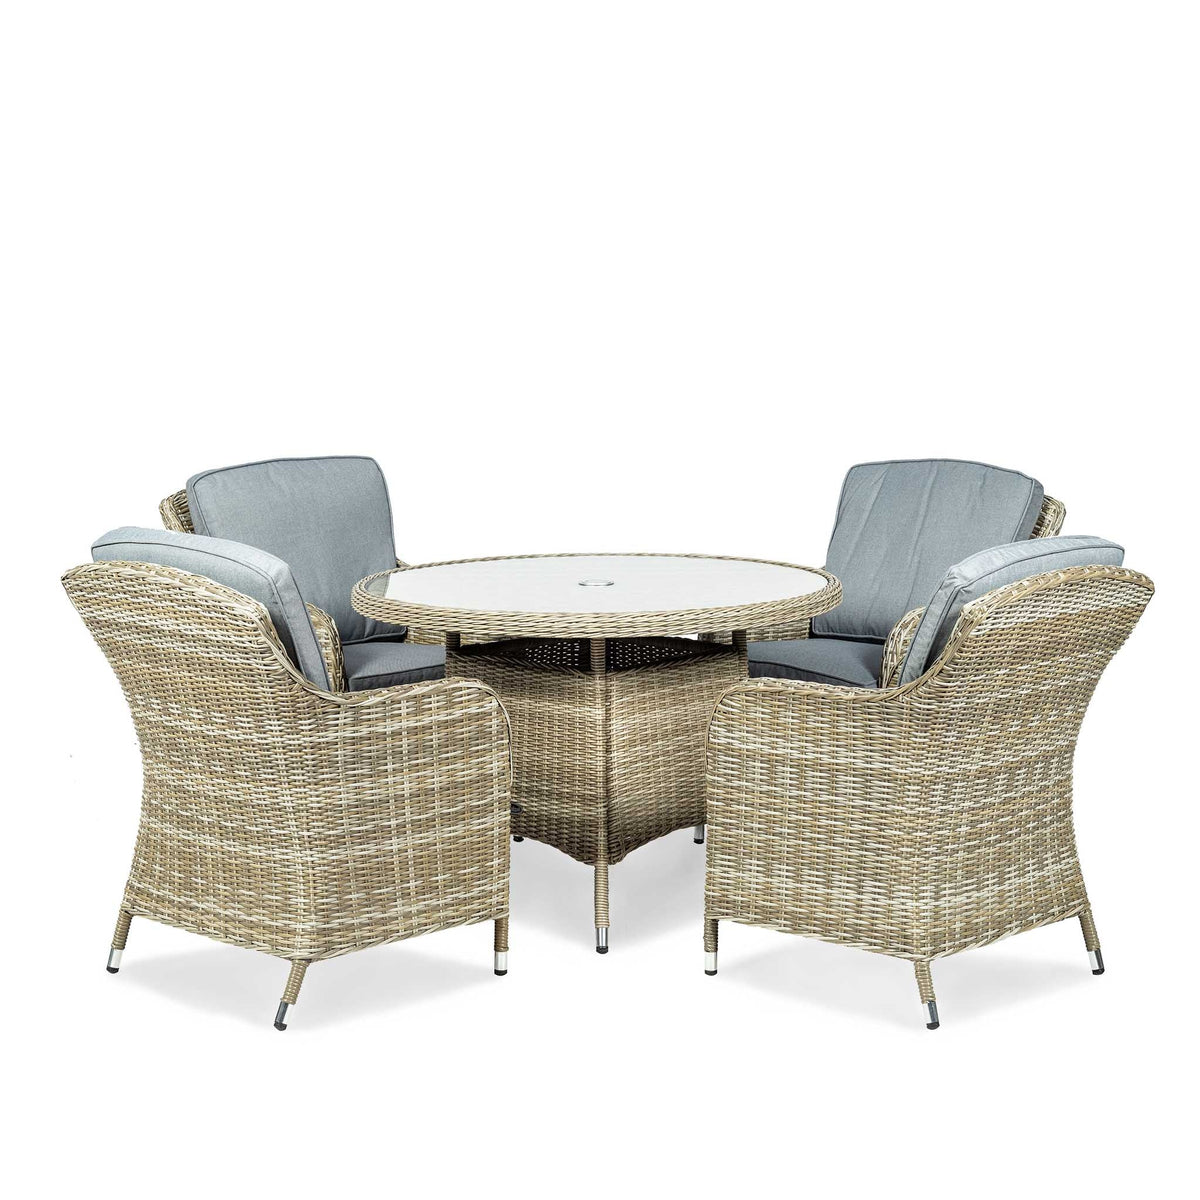 Wentworth 4 Seat 110cm Round Deluxe Rattan Dining Set from Roseland Home Furniture